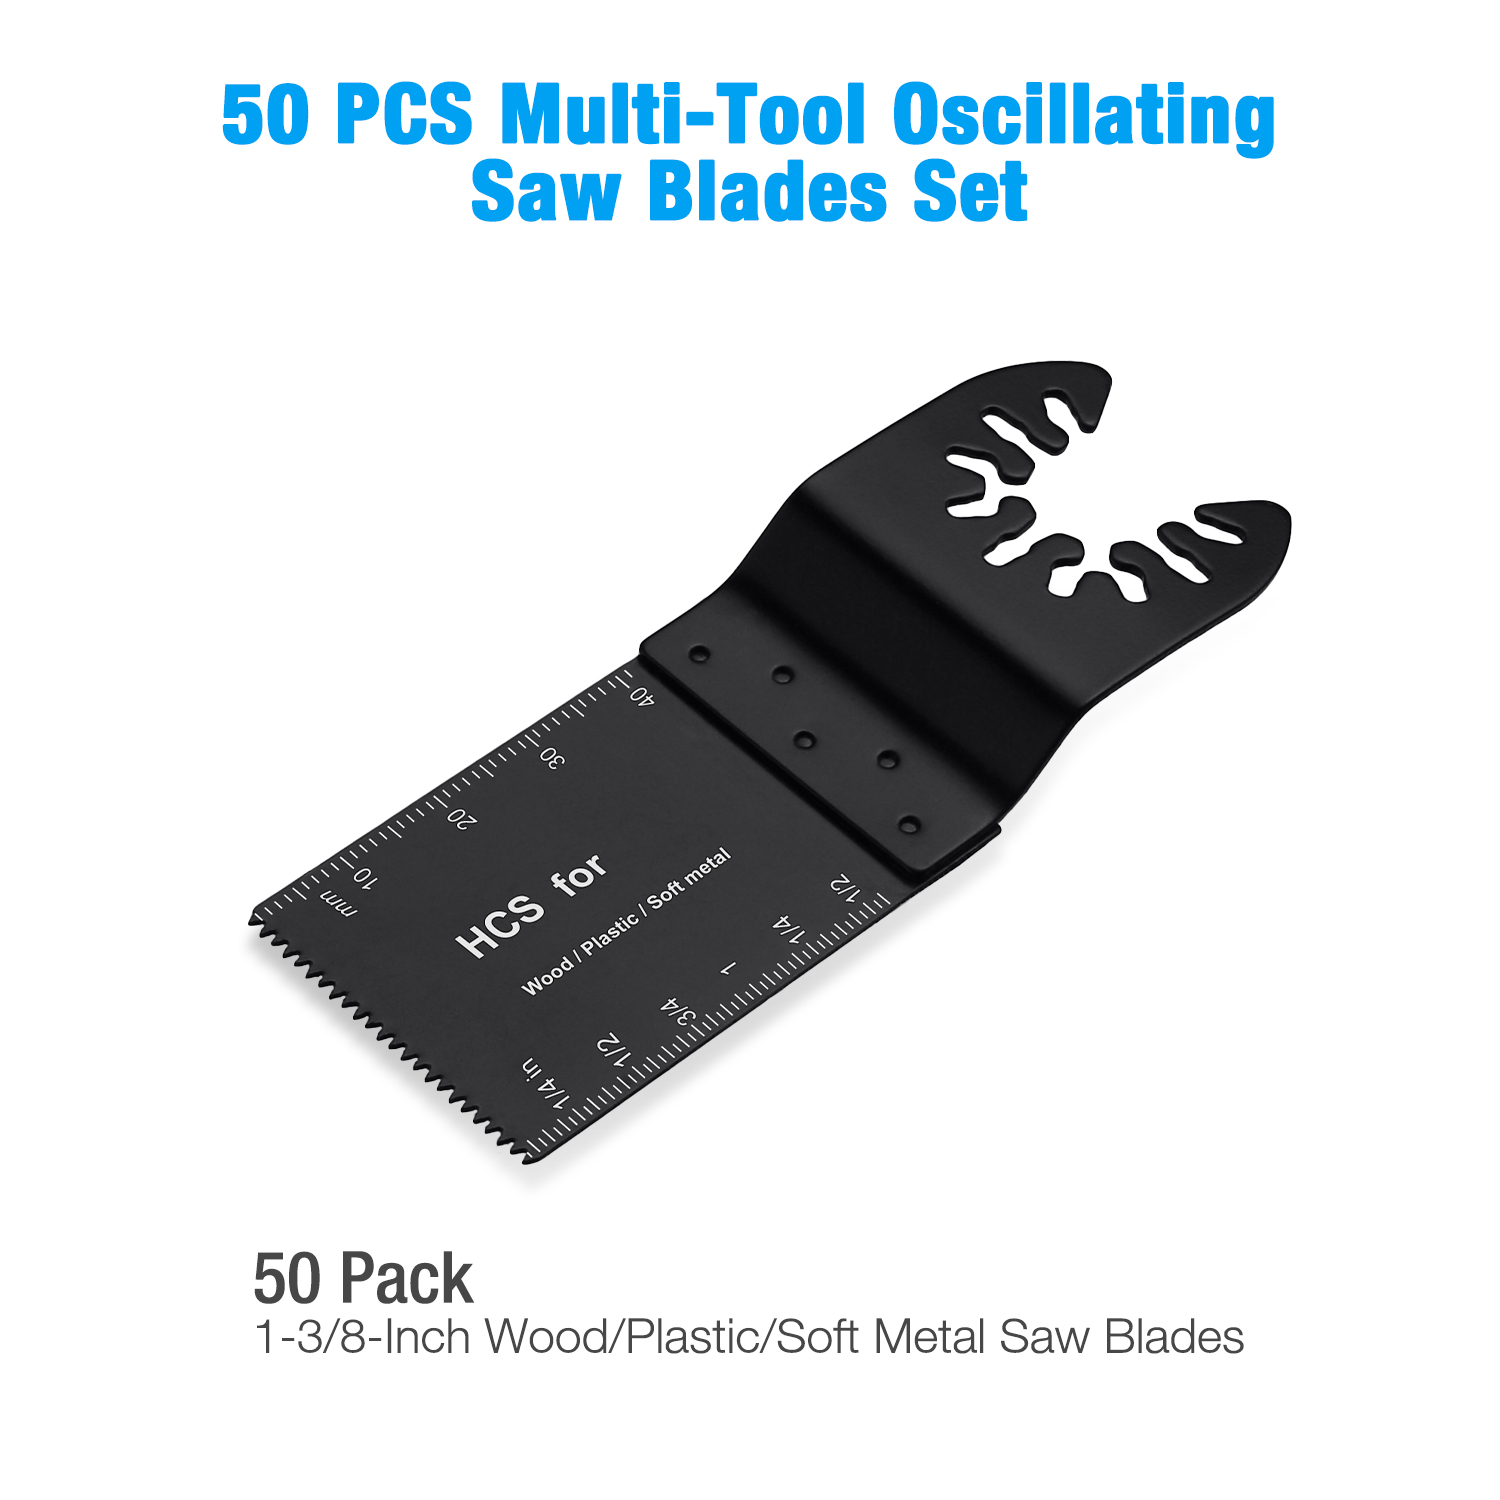 34mm Oscillating Multi Tool Saw Blades For De-walt Porter Cable Multitool